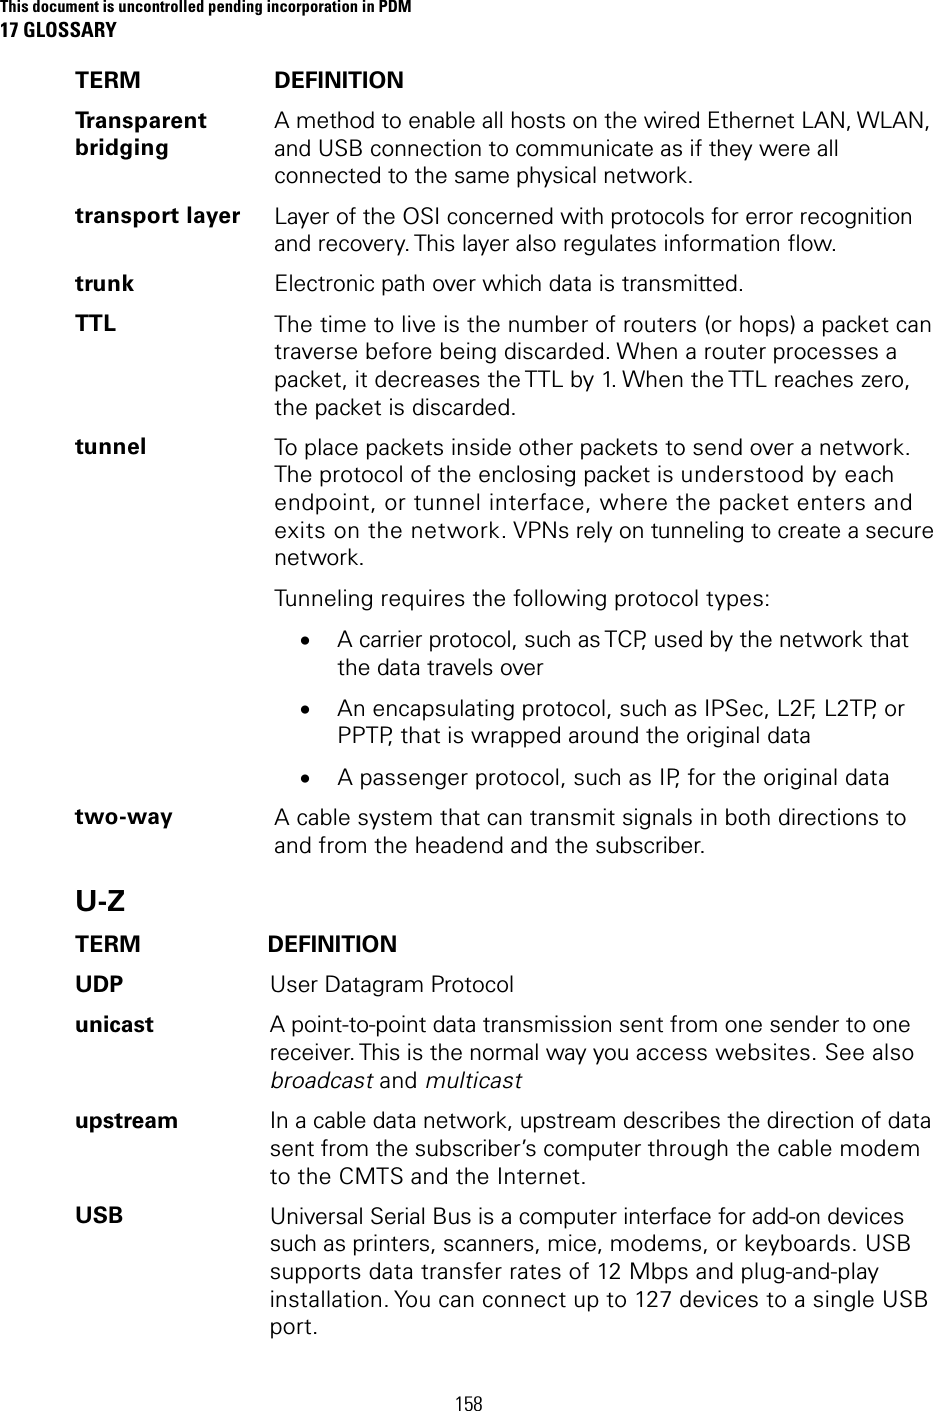 This document is uncontrolled pending incorporation in PDM 17 GLOSSARY 158 TERM DEFINITION Transparent bridging A method to enable all hosts on the wired Ethernet LAN, WLAN, and USB connection to communicate as if they were all connected to the same physical network. transport layer  Layer of the OSI concerned with protocols for error recognition and recovery. This layer also regulates information flow. trunk  Electronic path over which data is transmitted. TTL  The time to live is the number of routers (or hops) a packet can traverse before being discarded. When a router processes a packet, it decreases the TTL by 1. When the TTL reaches zero, the packet is discarded. tunnel  To place packets inside other packets to send over a network. The protocol of the enclosing packet is understood by each endpoint, or tunnel interface, where the packet enters and exits on the network. VPNs rely on tunneling to create a secure network. Tunneling requires the following protocol types: • A carrier protocol, such as TCP, used by the network that the data travels over • An encapsulating protocol, such as IPSec, L2F, L2TP, or PPTP, that is wrapped around the original data • A passenger protocol, such as IP, for the original data two-way  A cable system that can transmit signals in both directions to and from the headend and the subscriber. U-Z TERM DEFINITION UDP  User Datagram Protocol unicast  A point-to-point data transmission sent from one sender to one receiver. This is the normal way you access websites. See also broadcast and multicast upstream  In a cable data network, upstream describes the direction of data sent from the subscriber’s computer through the cable modem to the CMTS and the Internet. USB  Universal Serial Bus is a computer interface for add-on devices such as printers, scanners, mice, modems, or keyboards. USB supports data transfer rates of 12 Mbps and plug-and-play installation. You can connect up to 127 devices to a single USB port. 